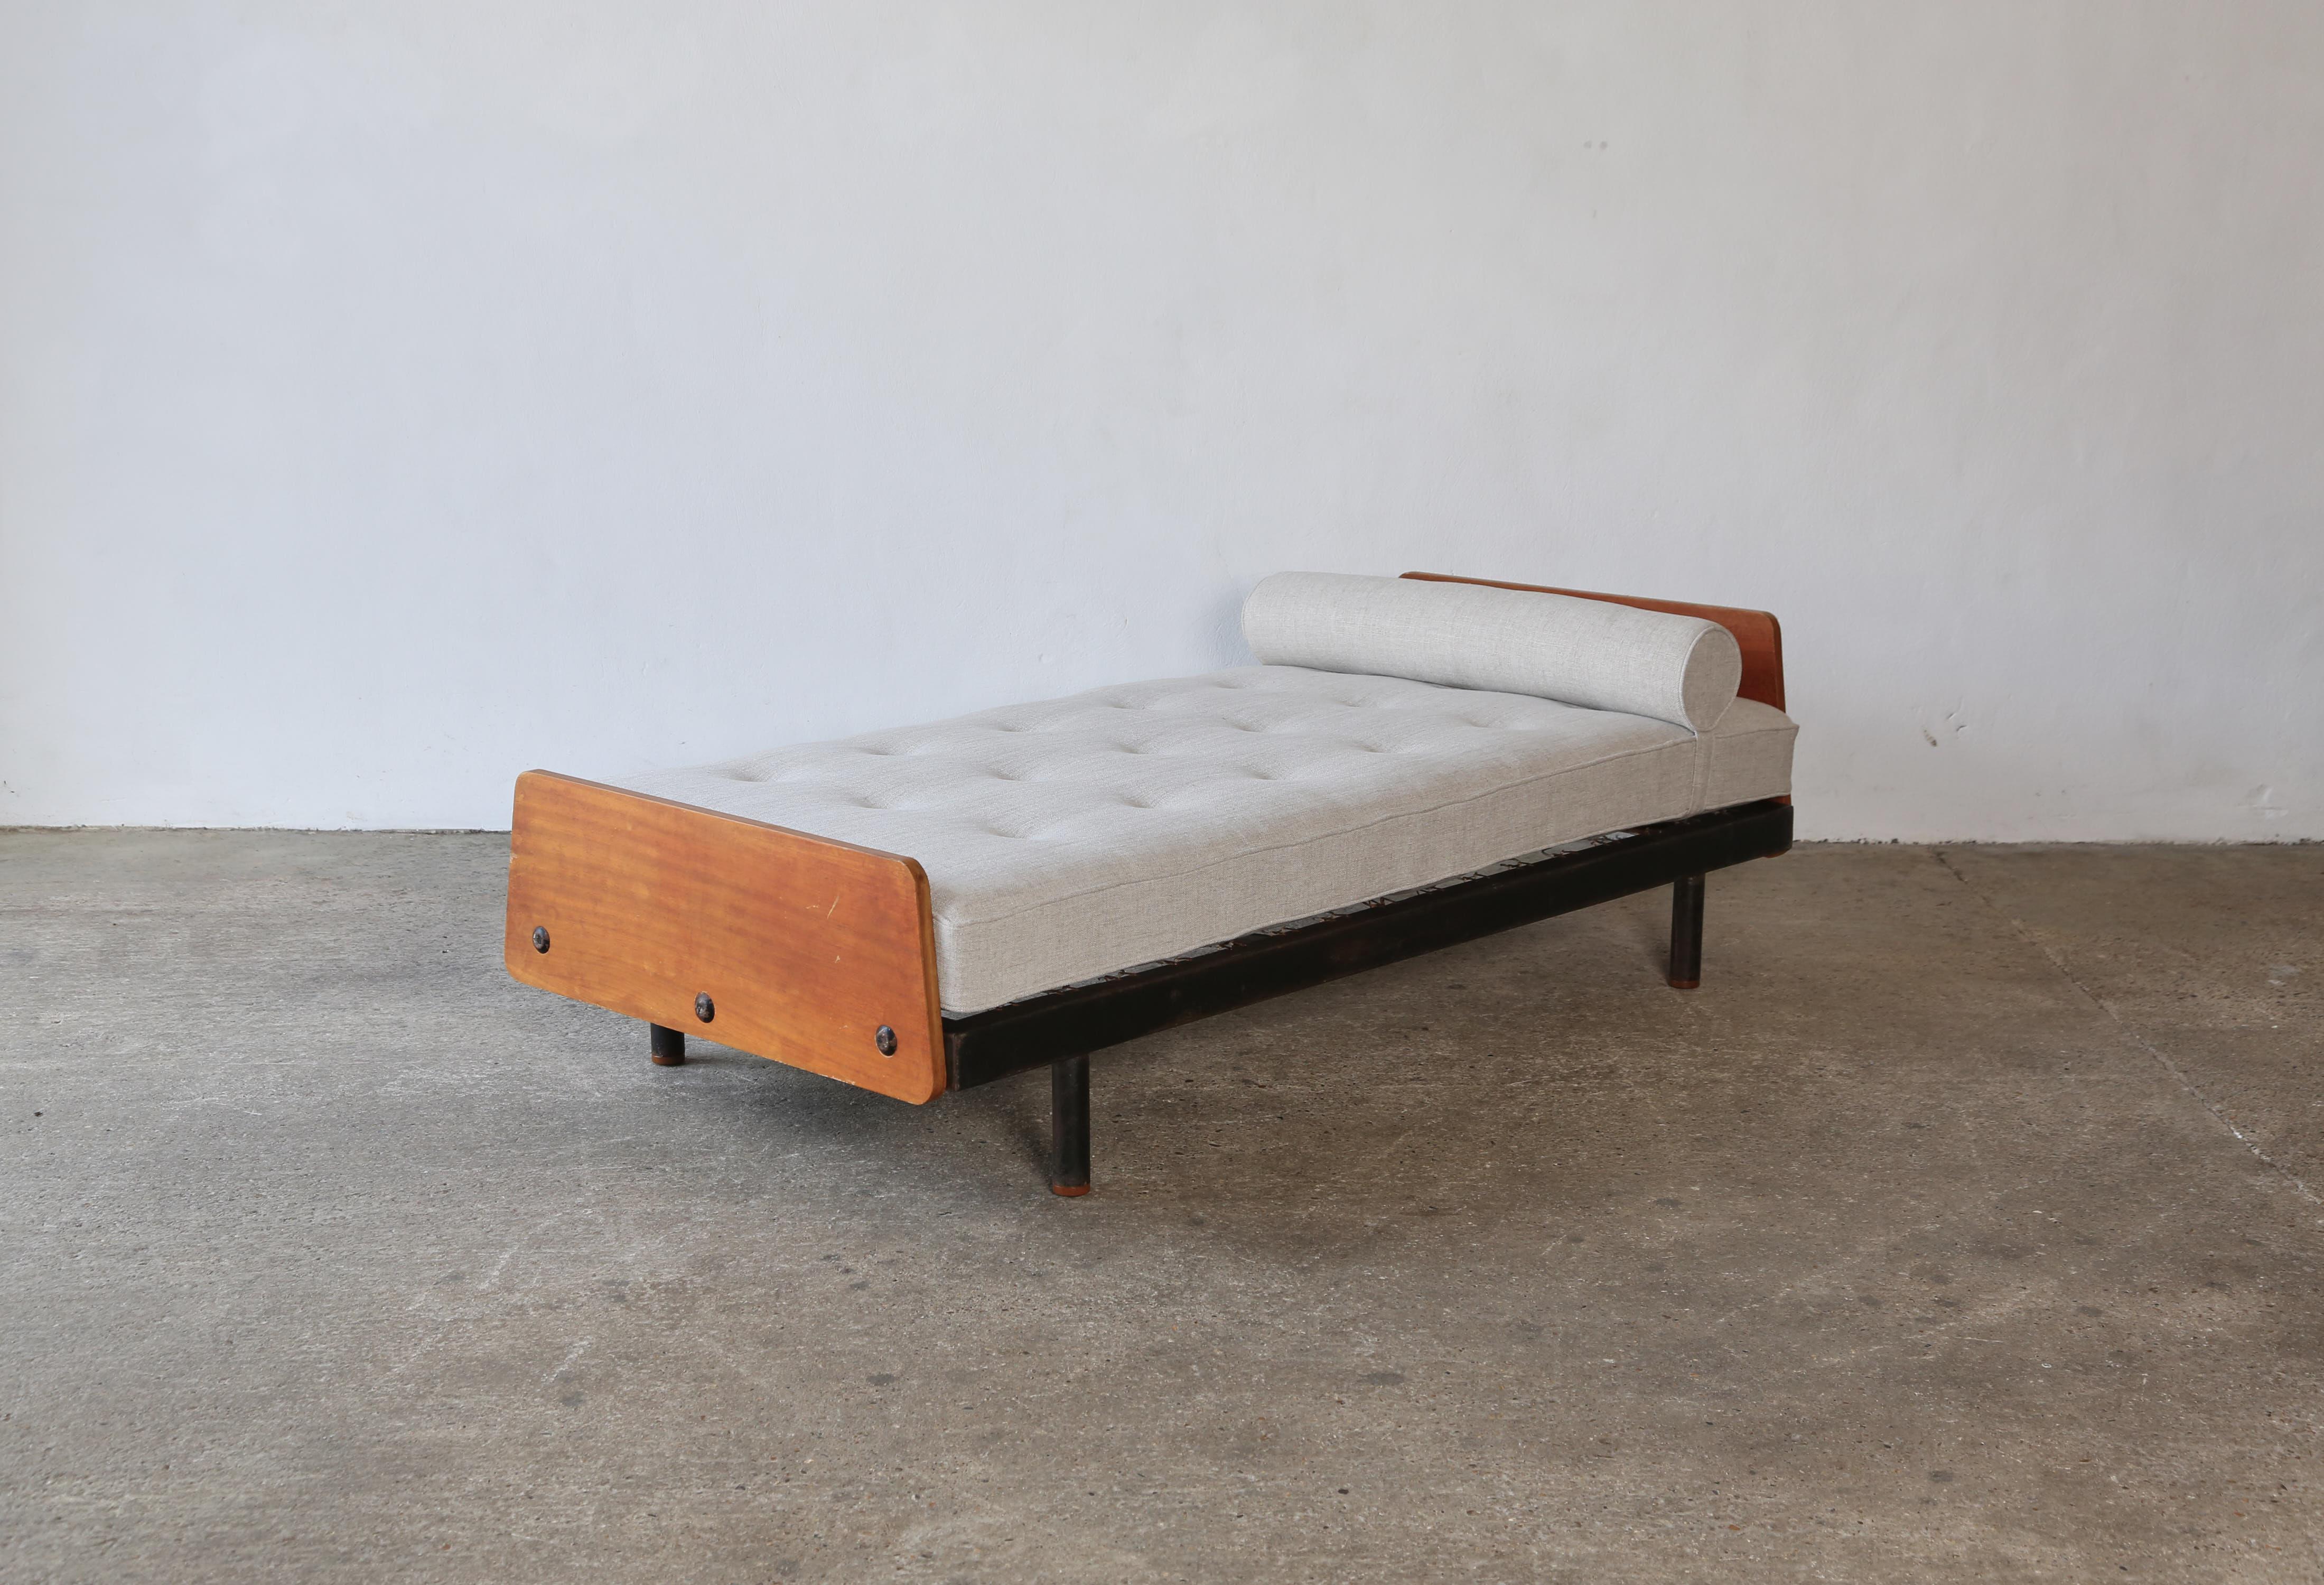 Rare Jean Prouve Daybed from Cité Cansado, Mauritania, 1950s. Mattress and bolster cushion newly upholstered in a neutral washed linen Larsen fabric. The frame and wood are in original condition showing signs of age. New wooden shoes have been